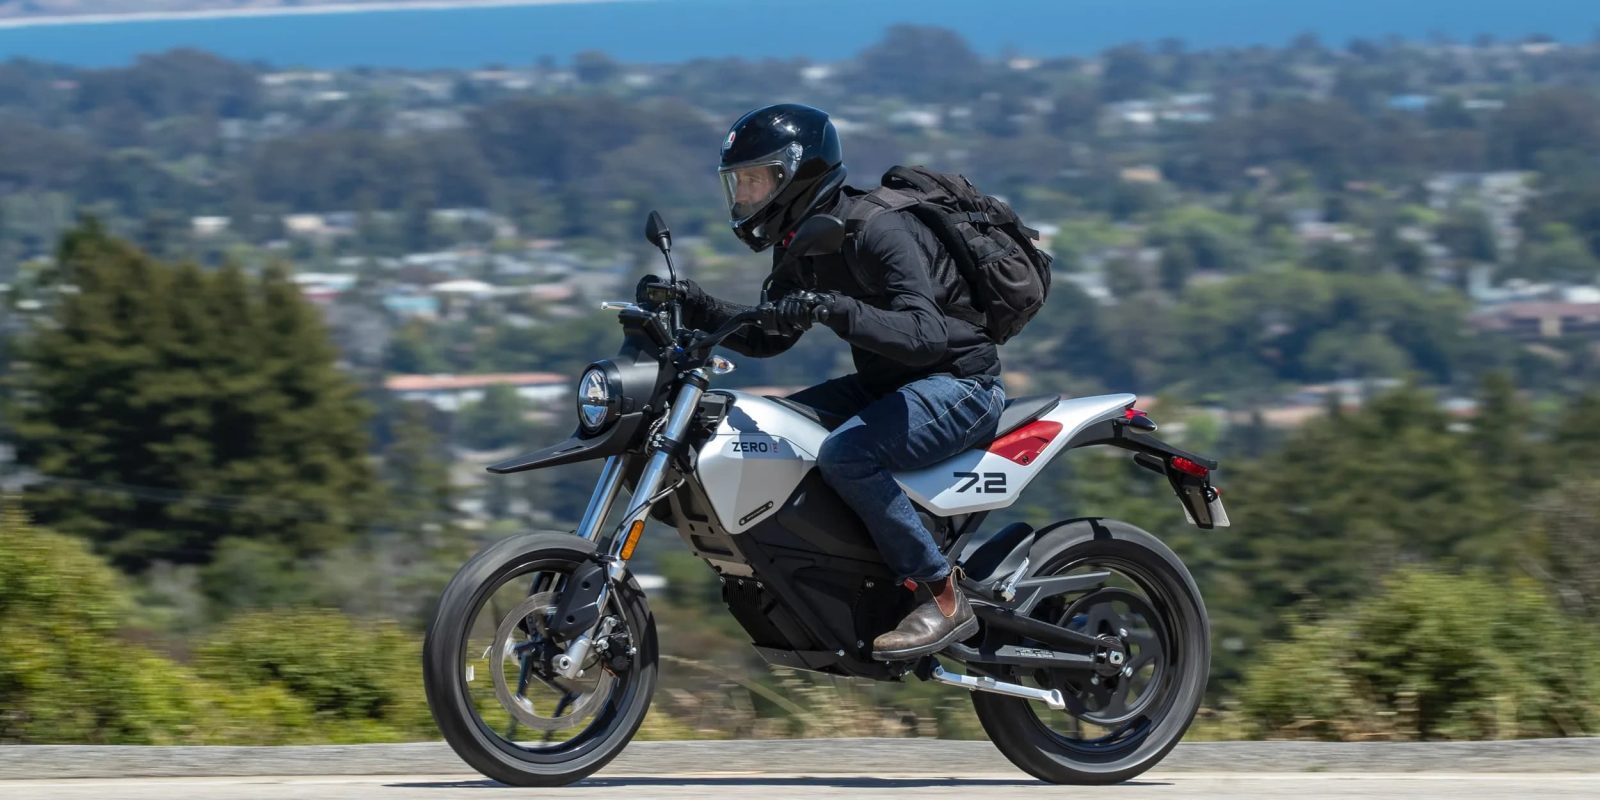 I’ve ridden every electric motorcycle out there. Here’s what I know